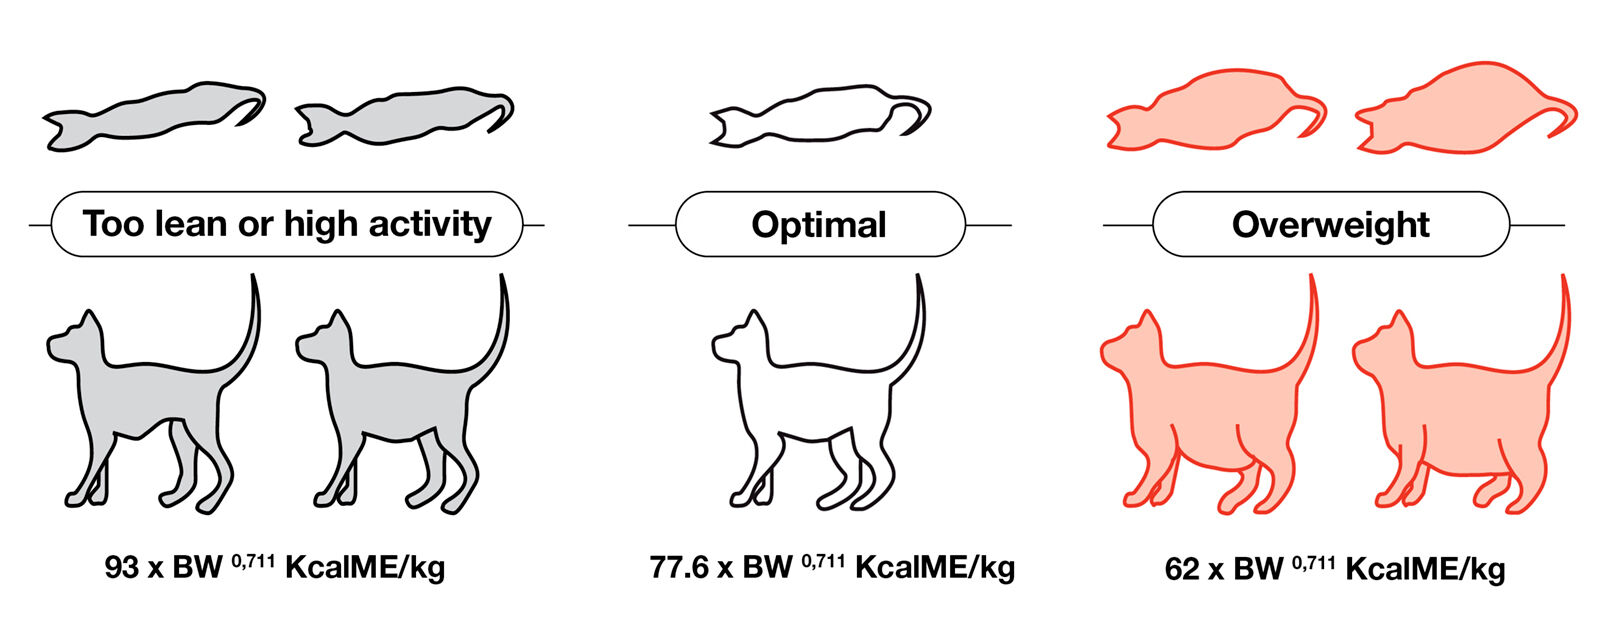 Figure 1. Energy requirements (in Kcal ME/kg bodyweight) and lifelong optimal body condition (modified from (7), (8) & (9)).